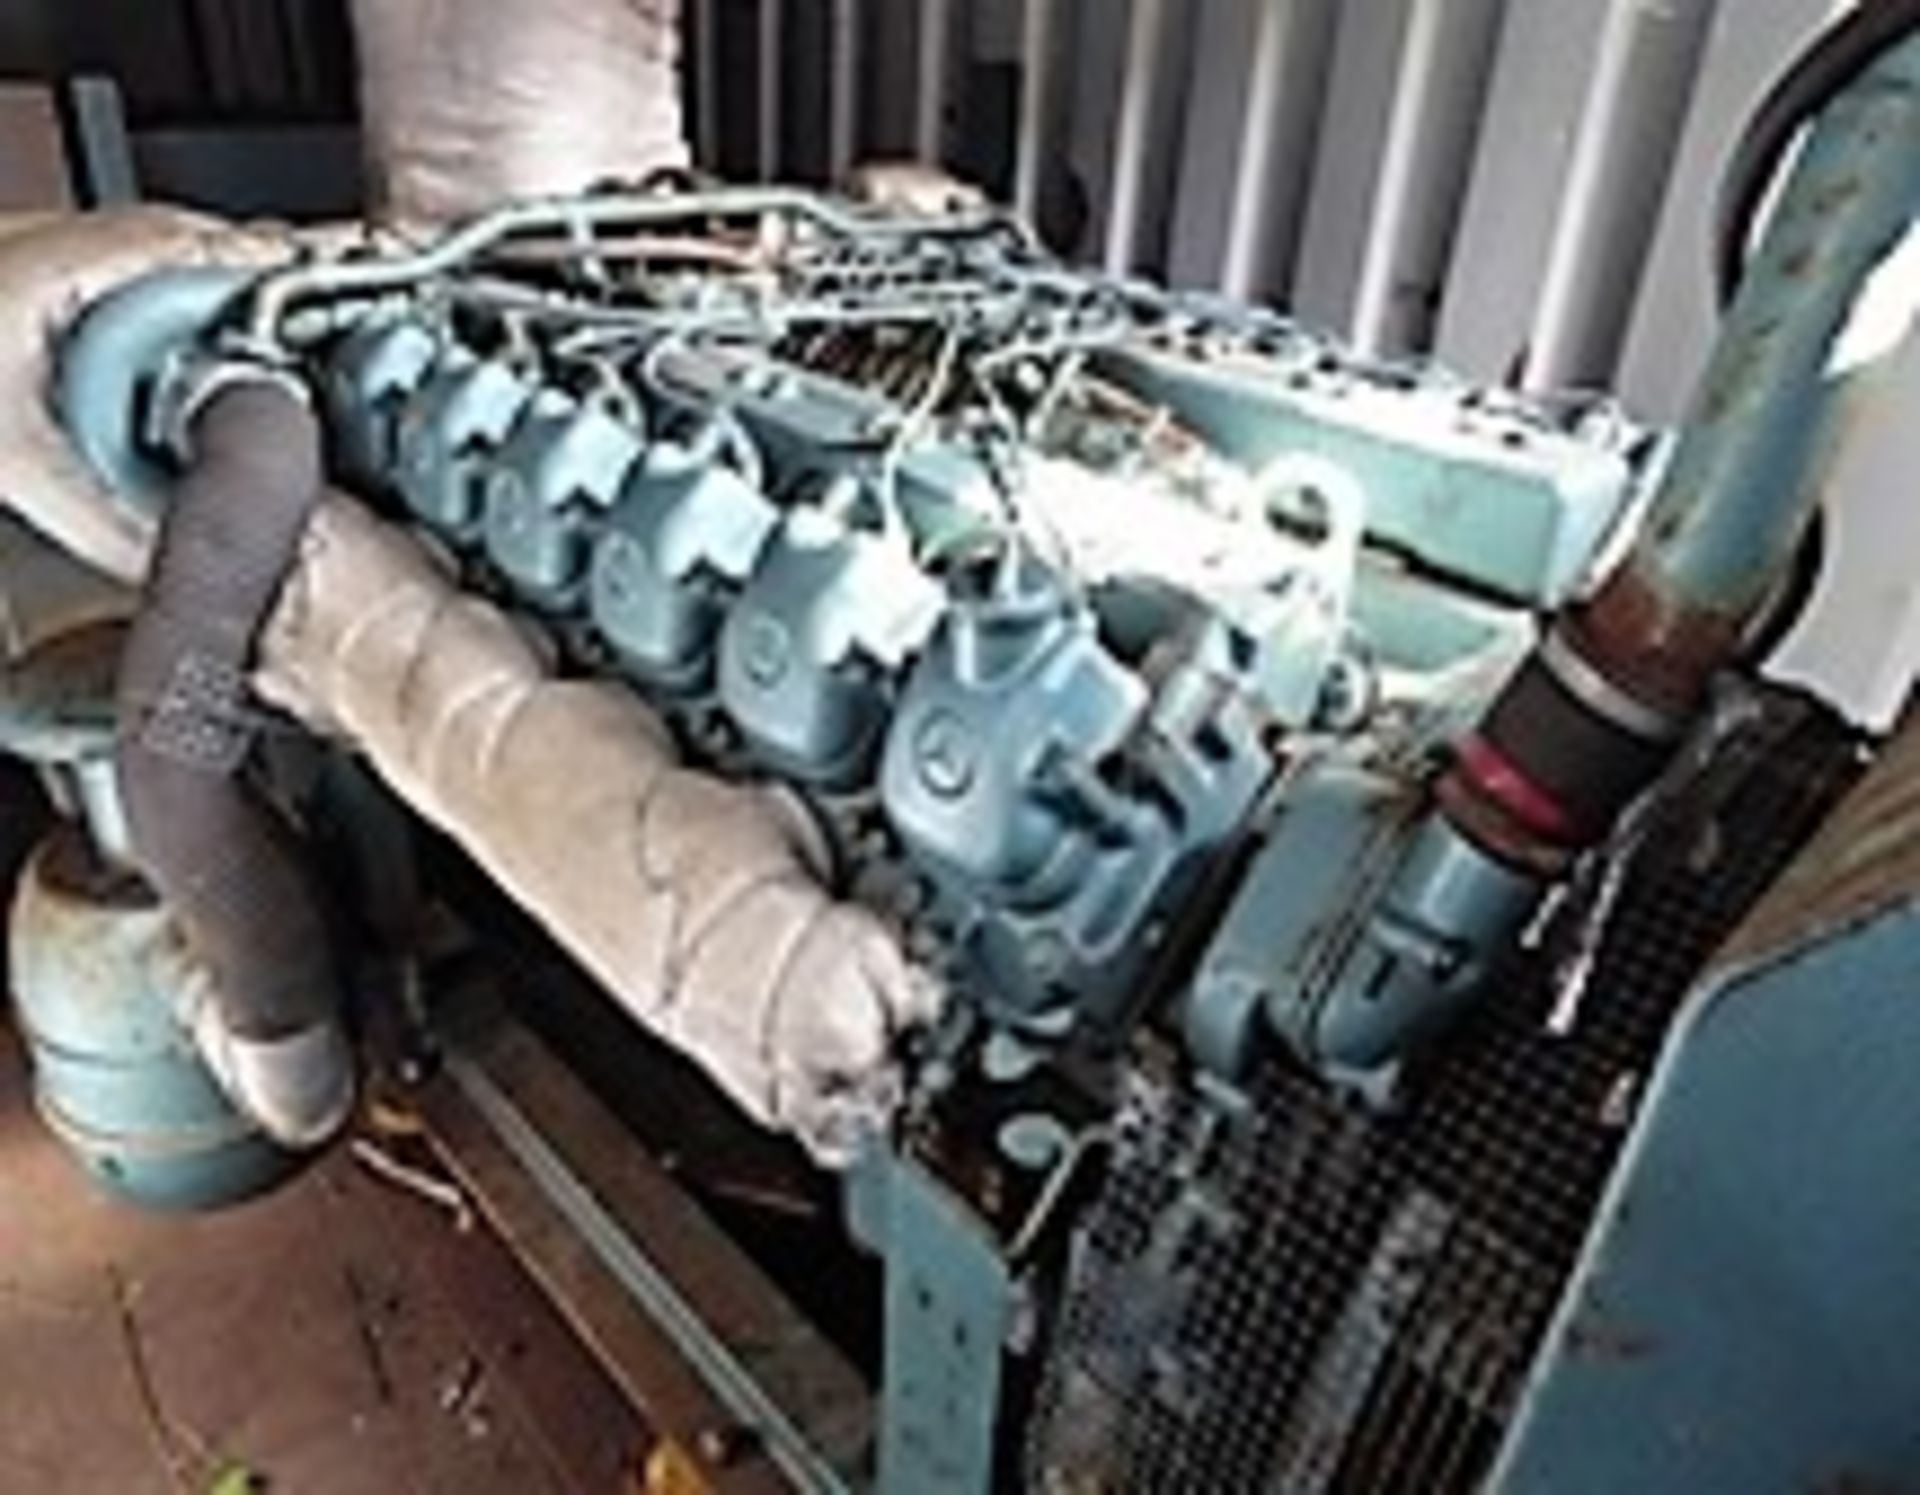 MERCEDES V12 DIESEL GENERATOR, 300KVA, HOUSED IN 20FT CONTAINER WITH SELF CONTAINED FUEL TANK ** VIE